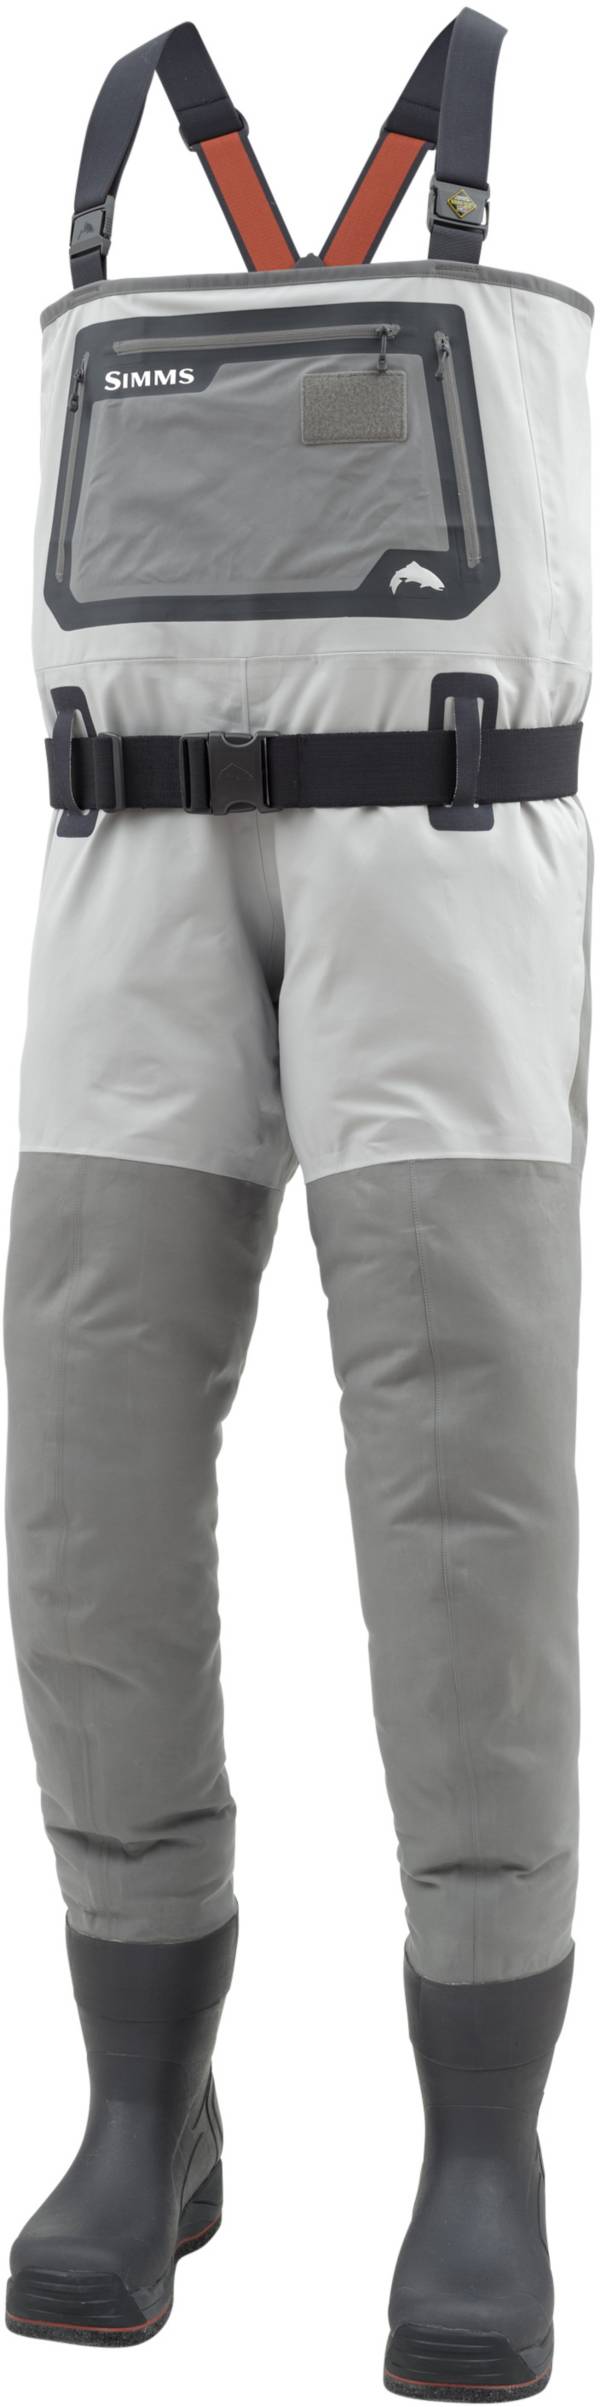 Simms G3 Guide Bootfoot Chest Waders – Felt Sole product image